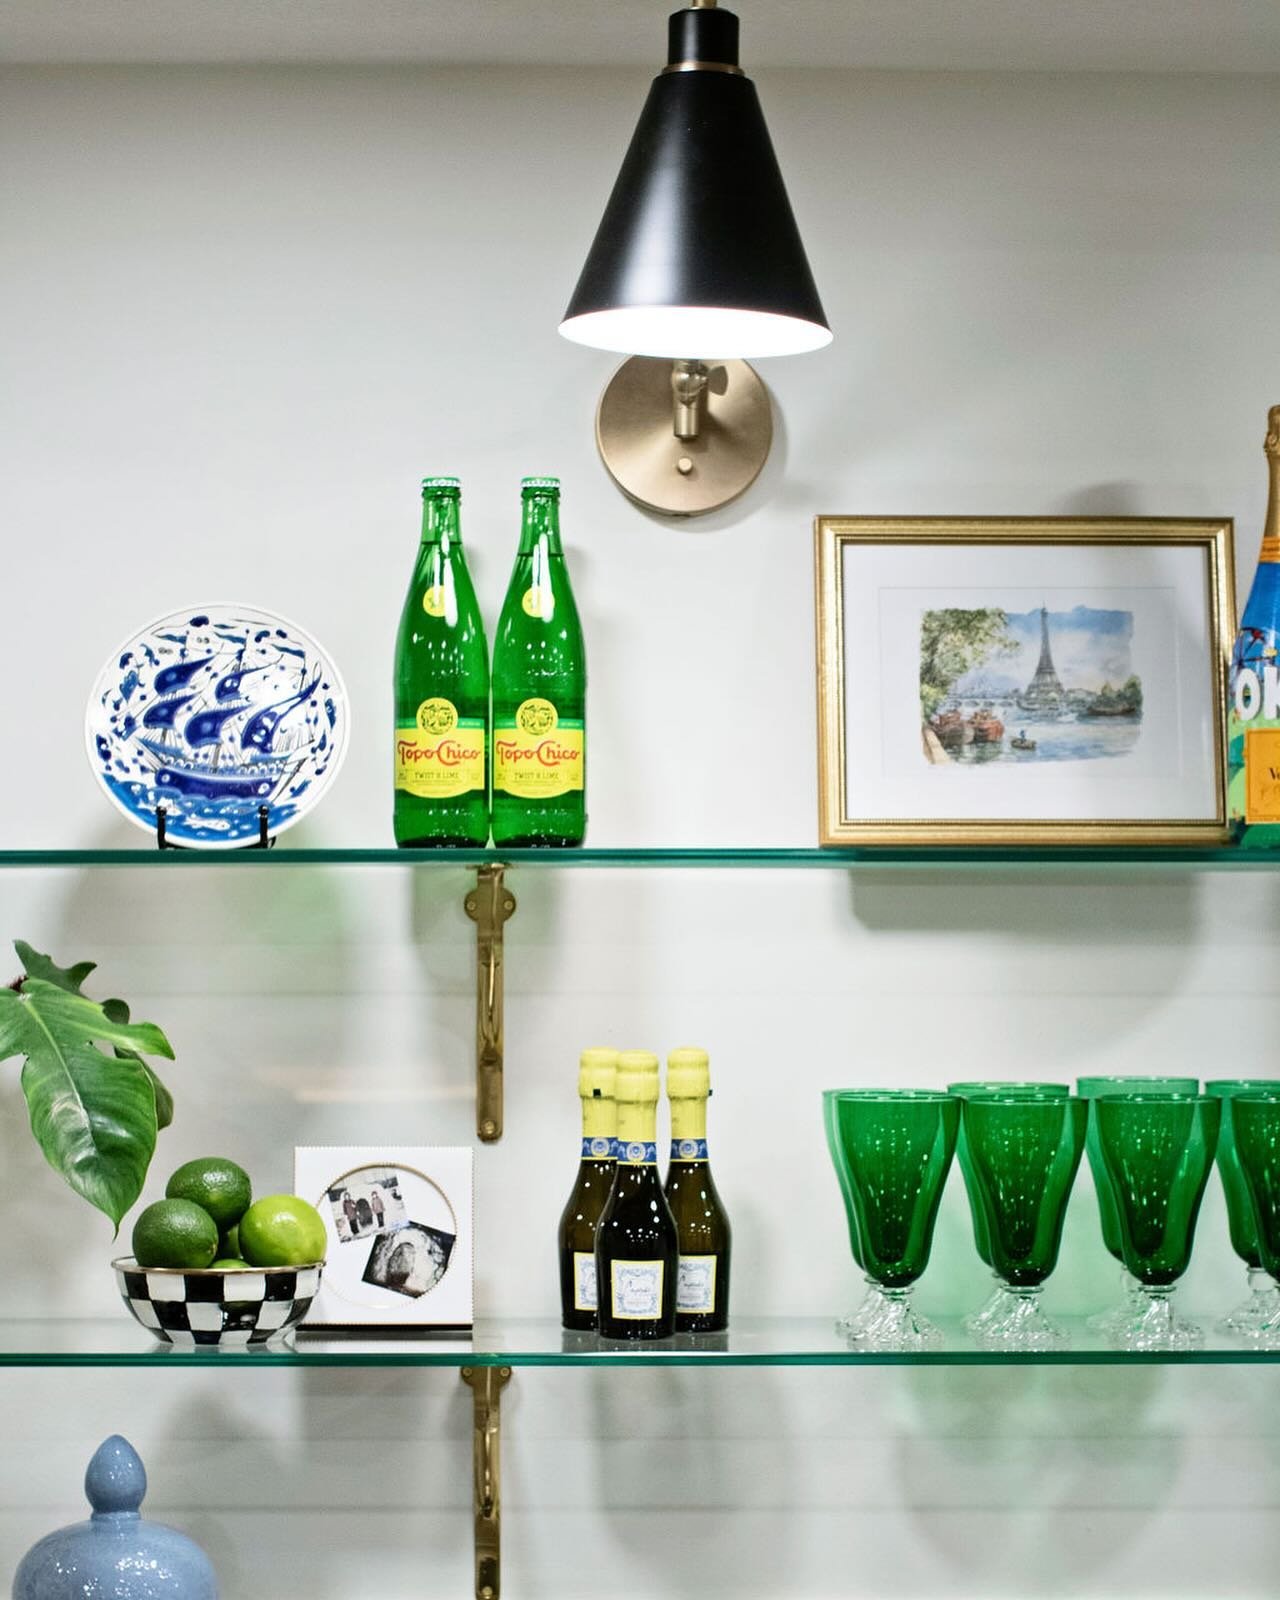 my client&rsquo;s green glasses from her grandmother added the perfect pop &amp; story. it&rsquo;s always in the mix.💚 #shelfie #basementremodel #howyouhome #greeninteriors #stylemyhome